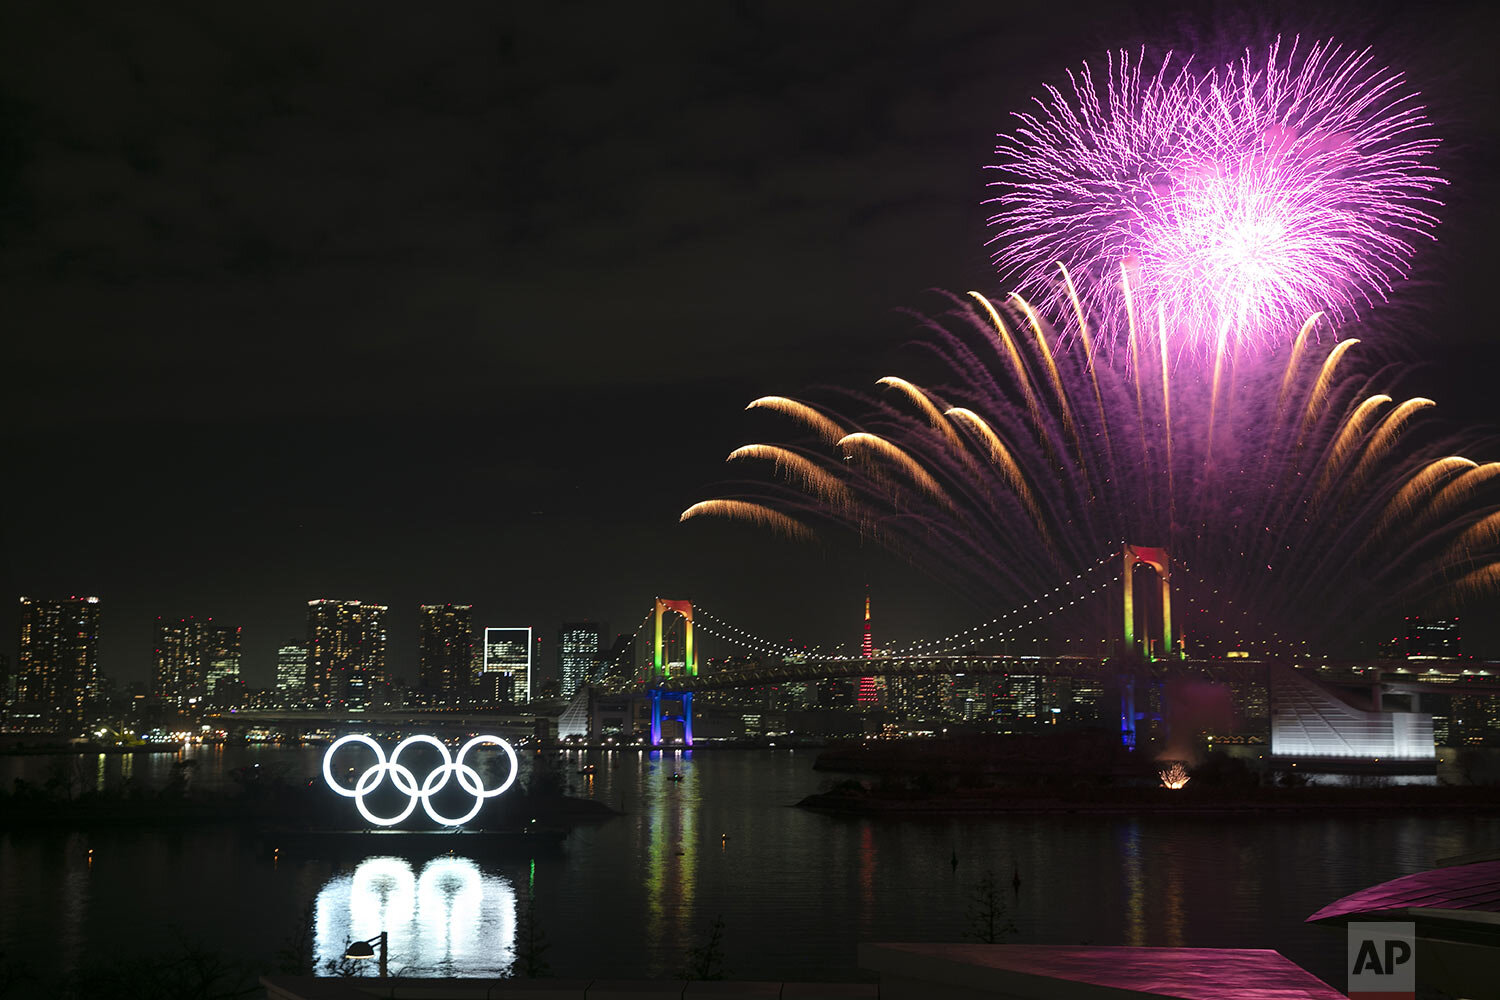  Fireworks light up the sky near the illuminated Olympic rings during a ceremony held to celebrate the 6-months-to-go milestone for the Tokyo 2020 Olympics, in the Odaiba district of Tokyo, Friday, Jan. 24, 2020. (AP Photo/Jae C. Hong) 